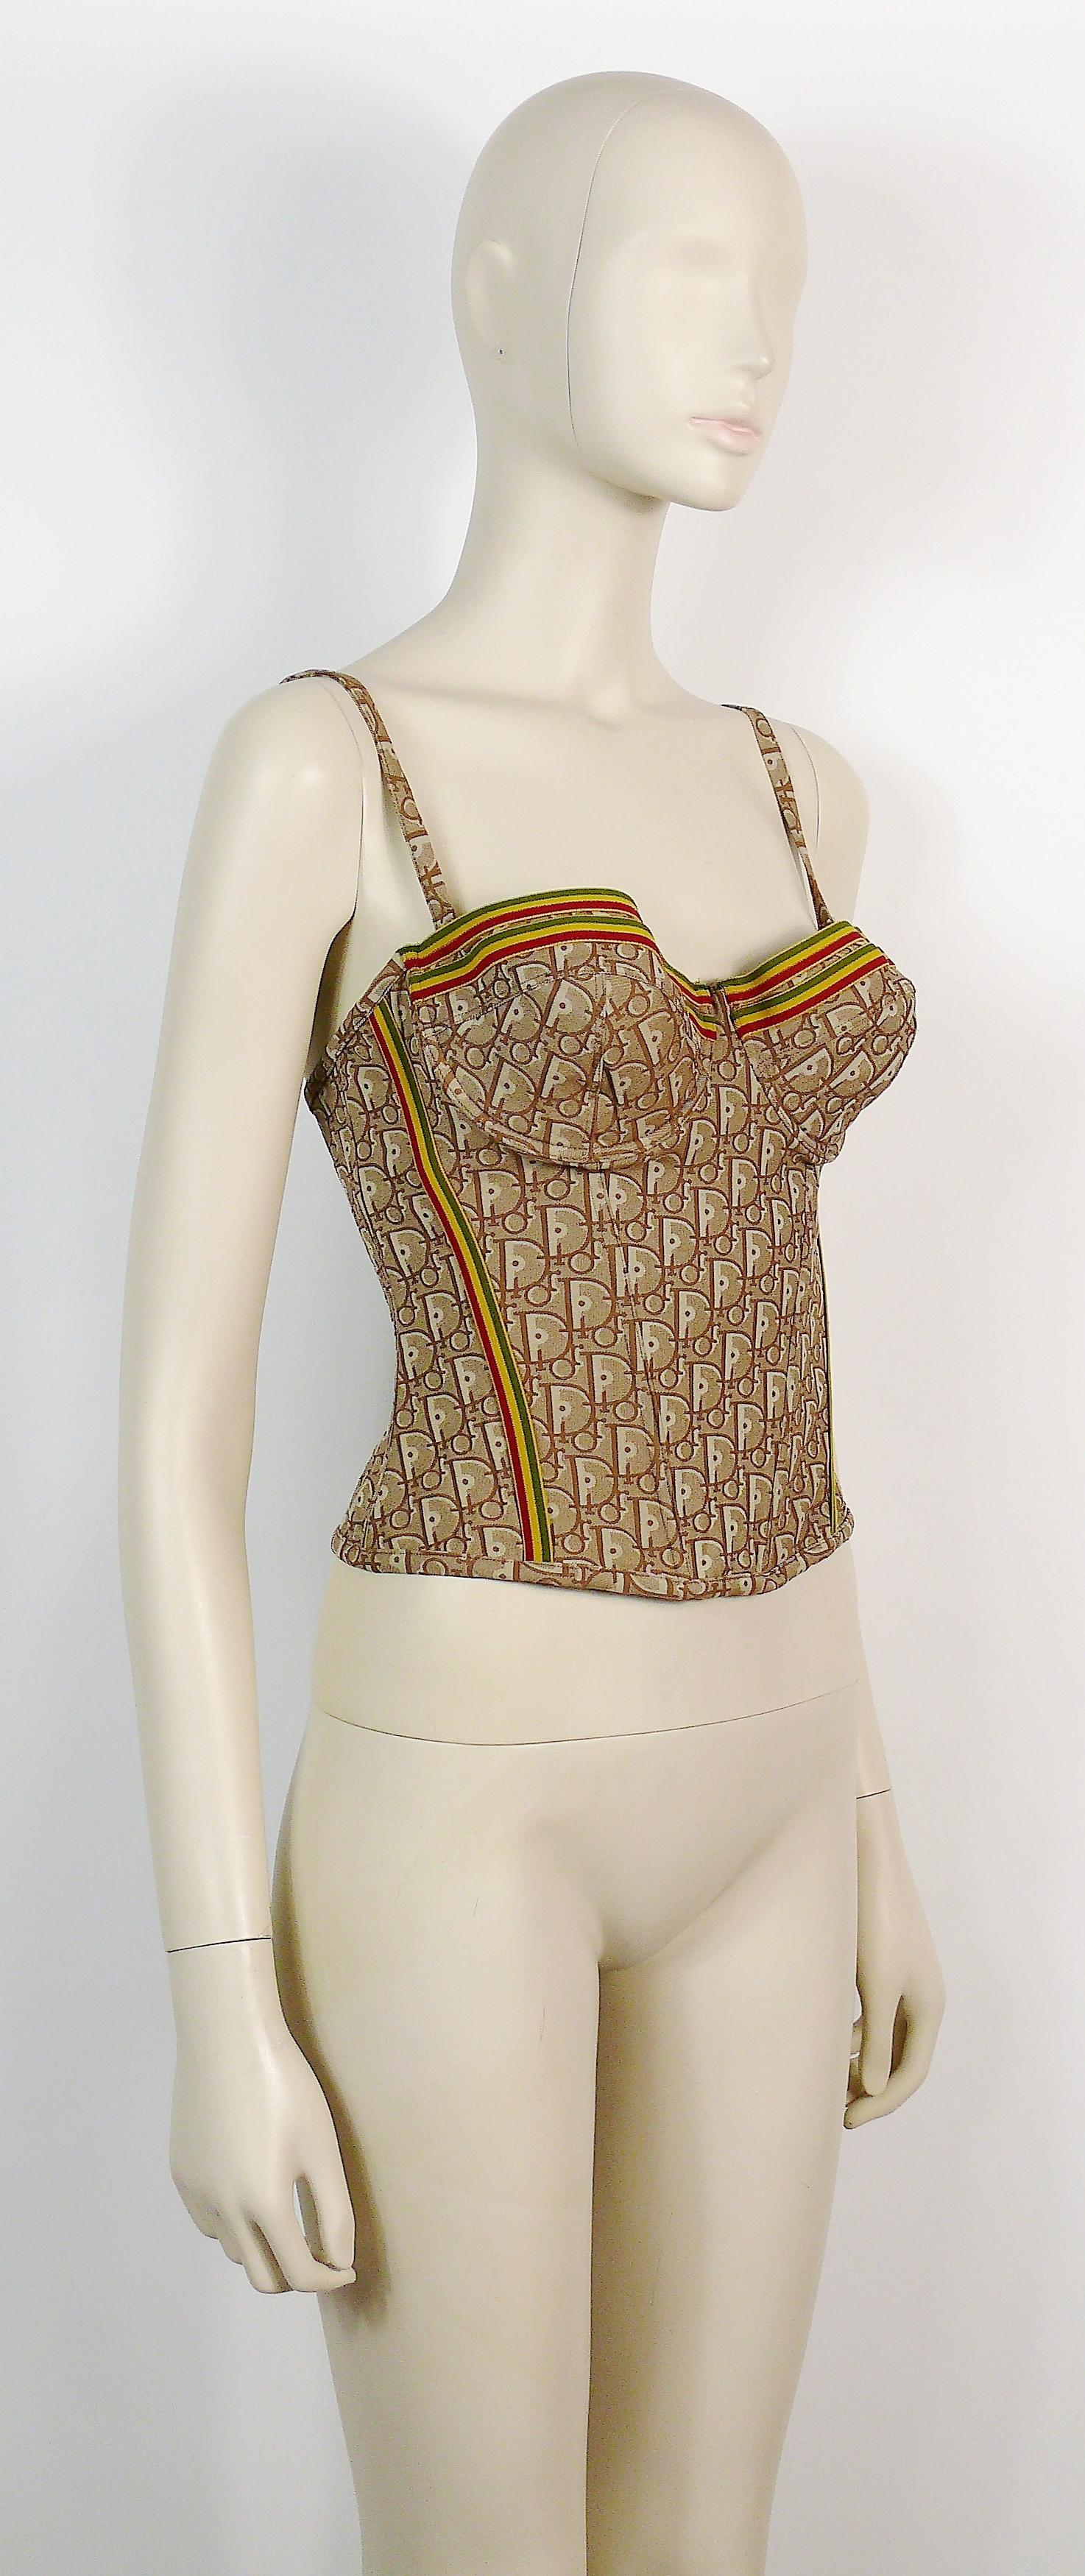 CHRISTIAN DIOR iconic rasta monogram bustier top.

Label reads CHRISTIAN DIOR.
Made in France.

Size tag reads : FR 95C / US 36C / UE 80C / IT 4C. 

Composition tag reads : 54% Polyamid / 8% Cotton / 14% Elastan / 19% Polyester / 5%